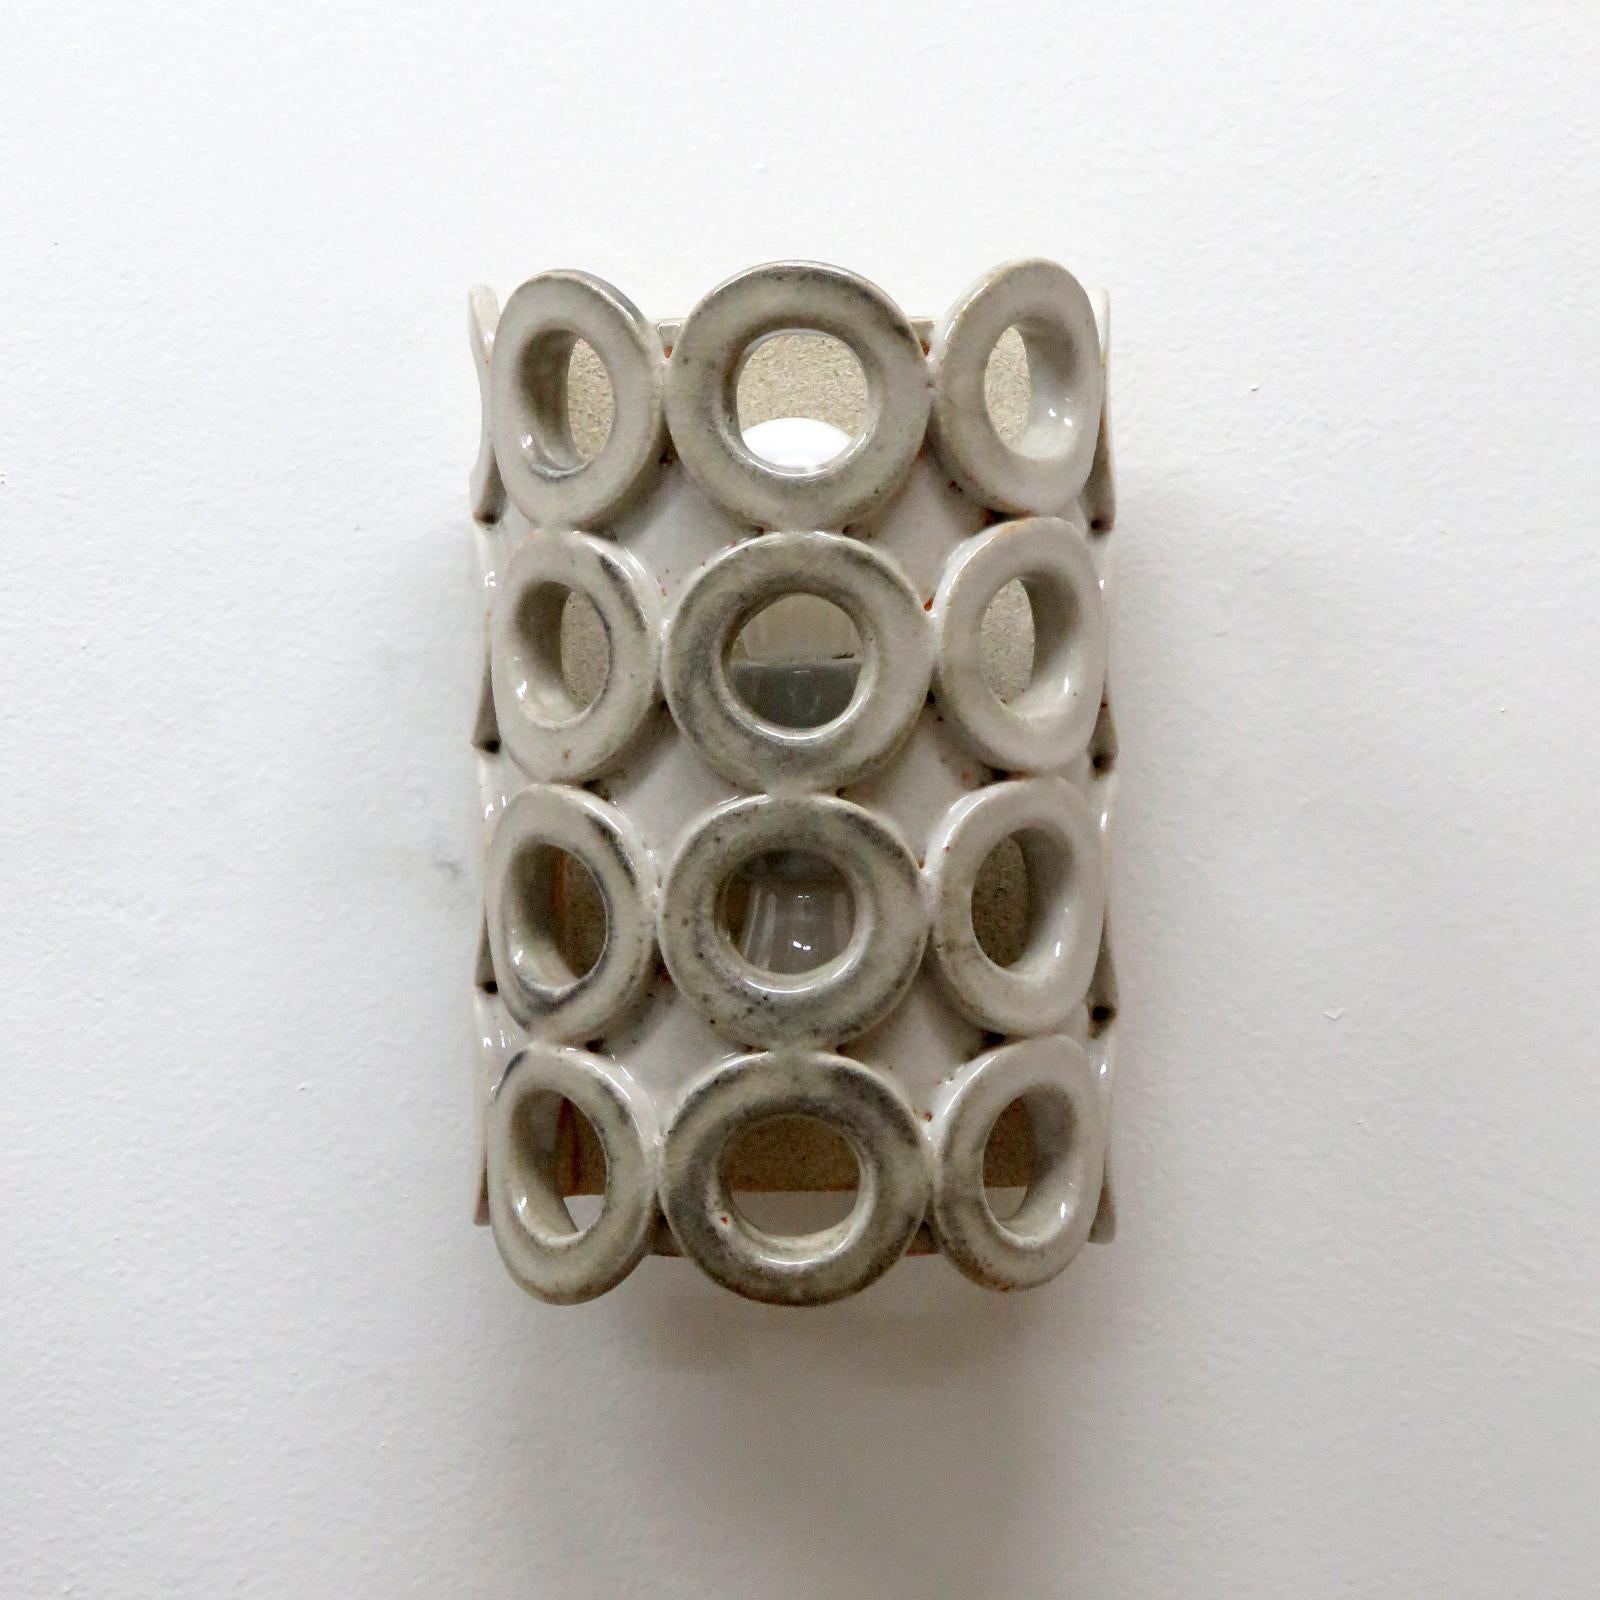 wonderfully sculptural ceramic wall lights No.50b, designed and handcrafted by Los Angeles based ceramicist Heather Levine. High fired stoneware with grey and black accents glaze body with decorative perforations to expose light in patterns on